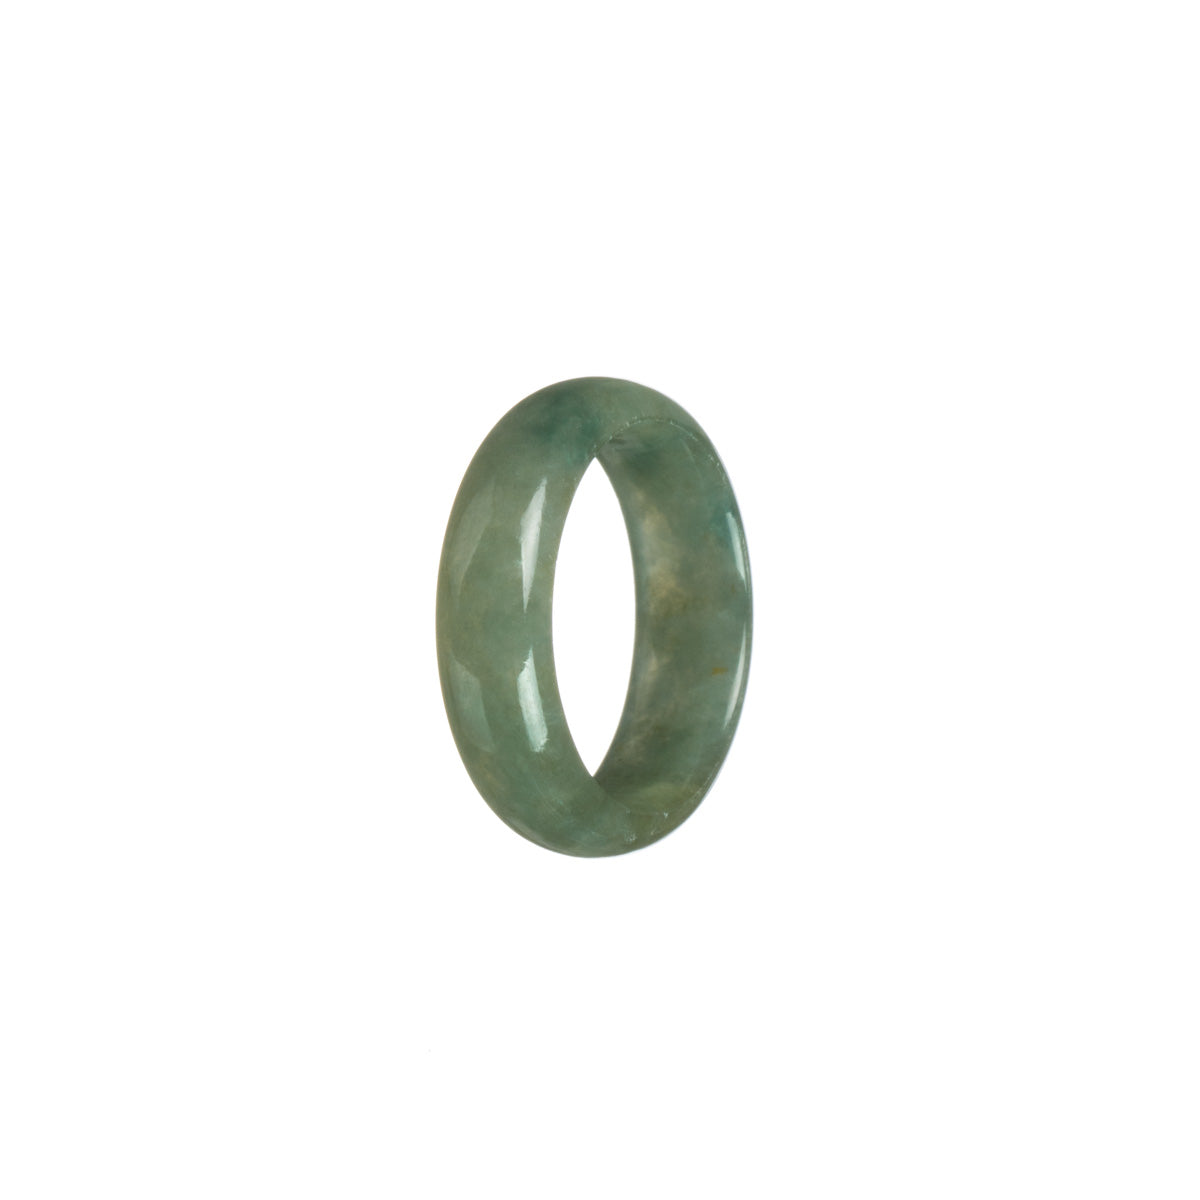 Authentic Olive Jade Band - Size S 1/2